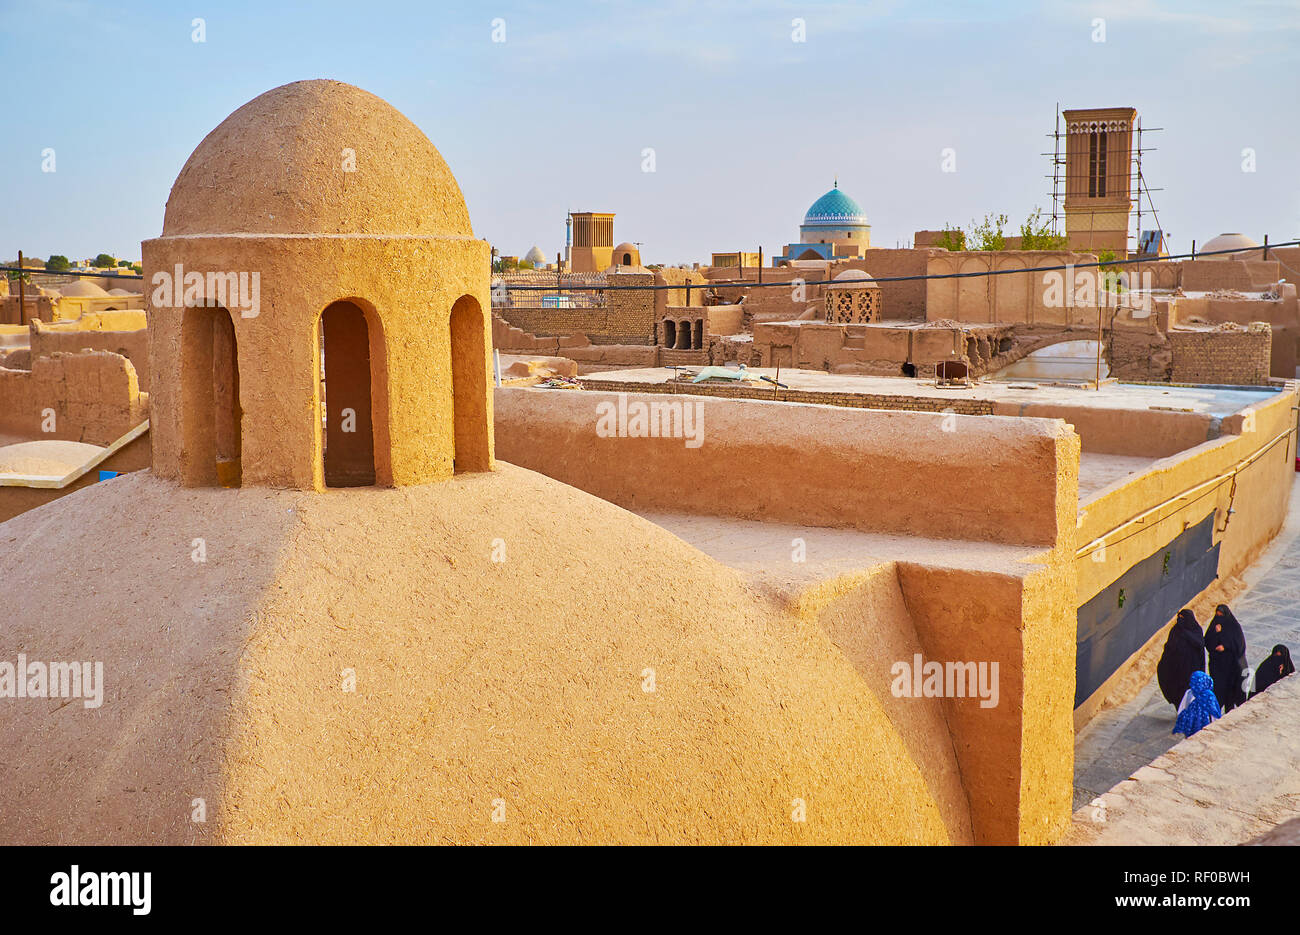 The medieval cityscape of Yazd with preserved mudbrick quarters of Fahadan district and adobe dome with chimney on the foreground, Iran. Stock Photo